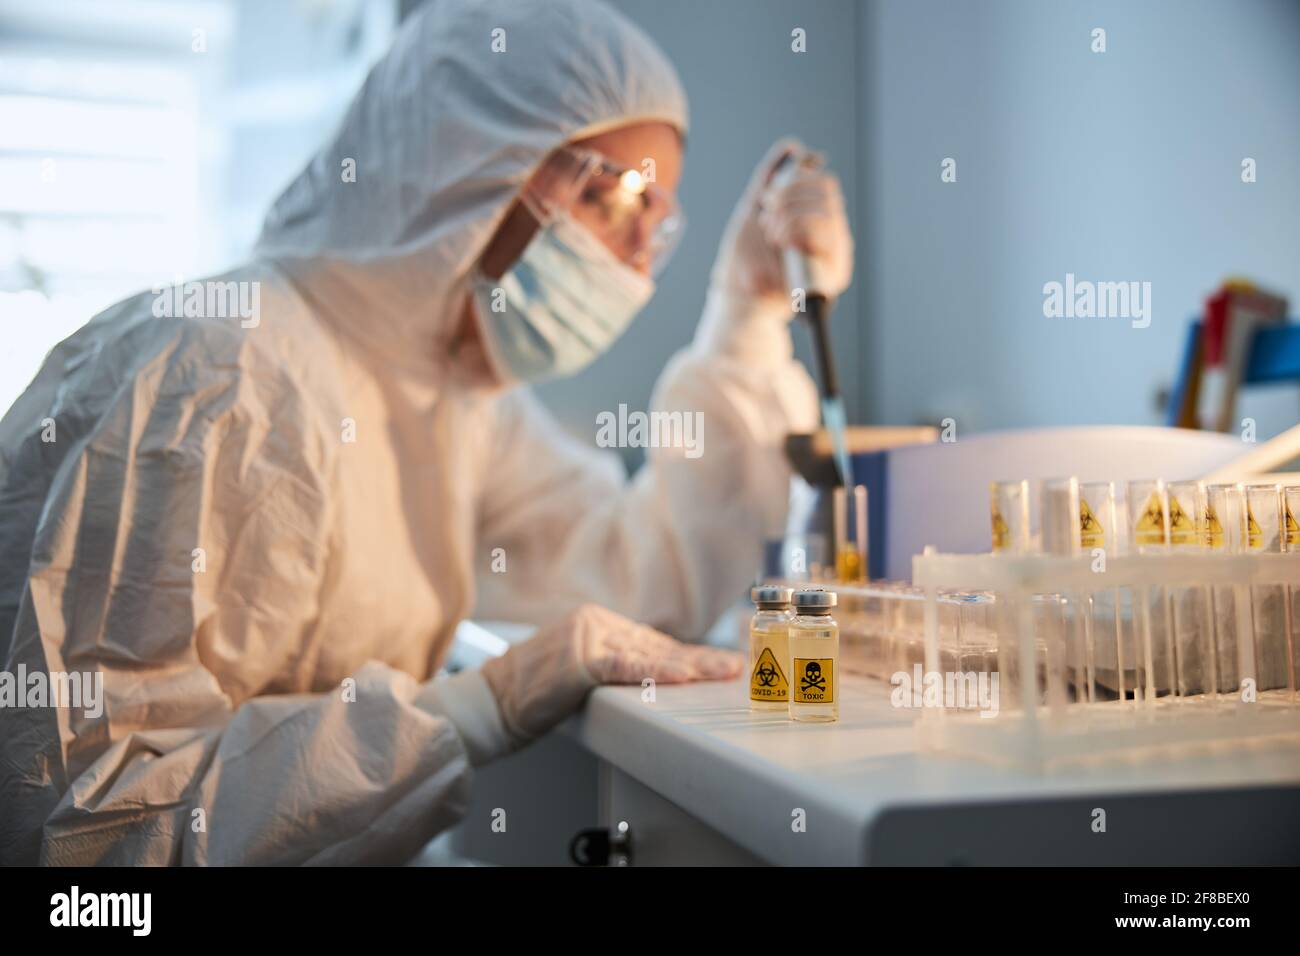 Experienced researcher in a hazmat suit working on a COVID vaccine Stock Photo